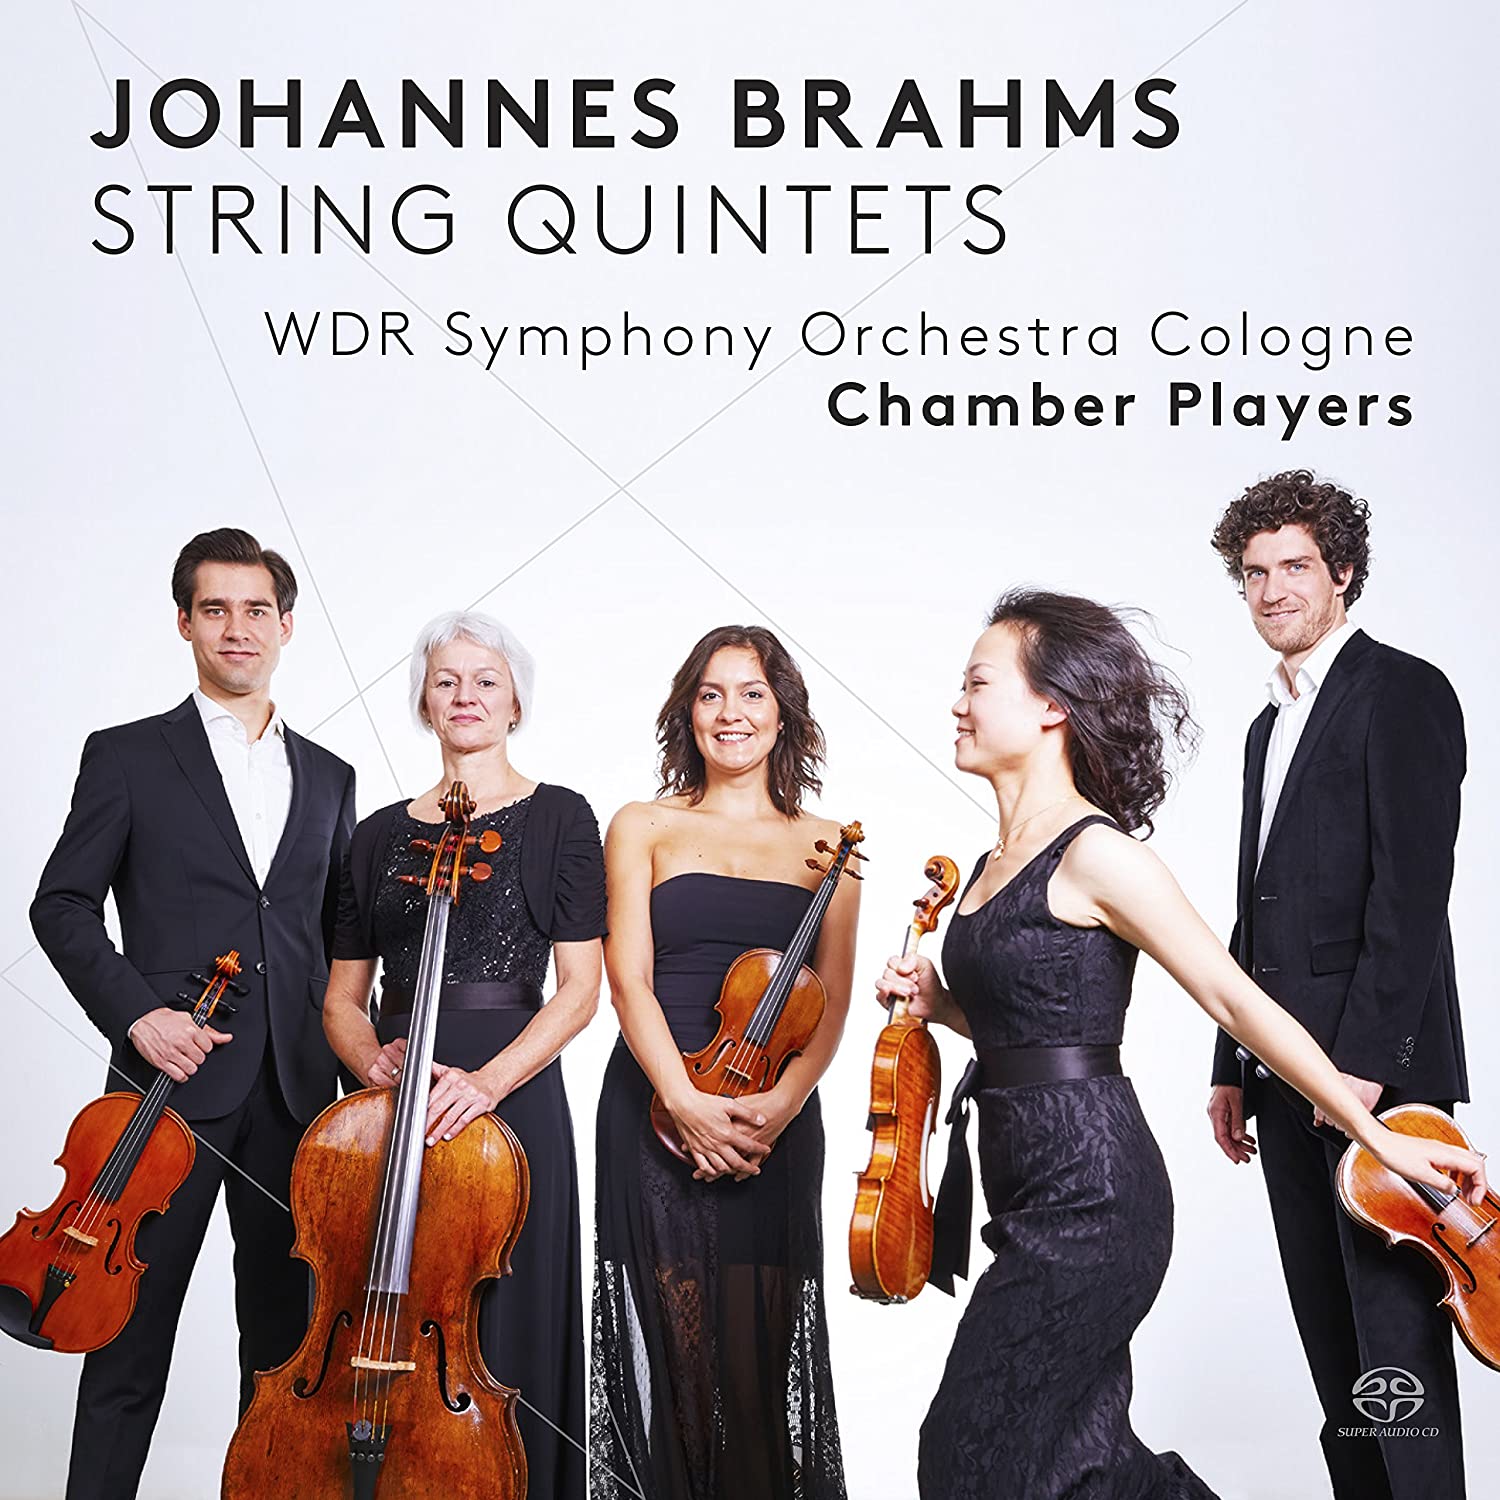 WDR Symphony Orchestra - 2017 - Brahms String Quintets [2017 SACD] 5.1 24-88.2